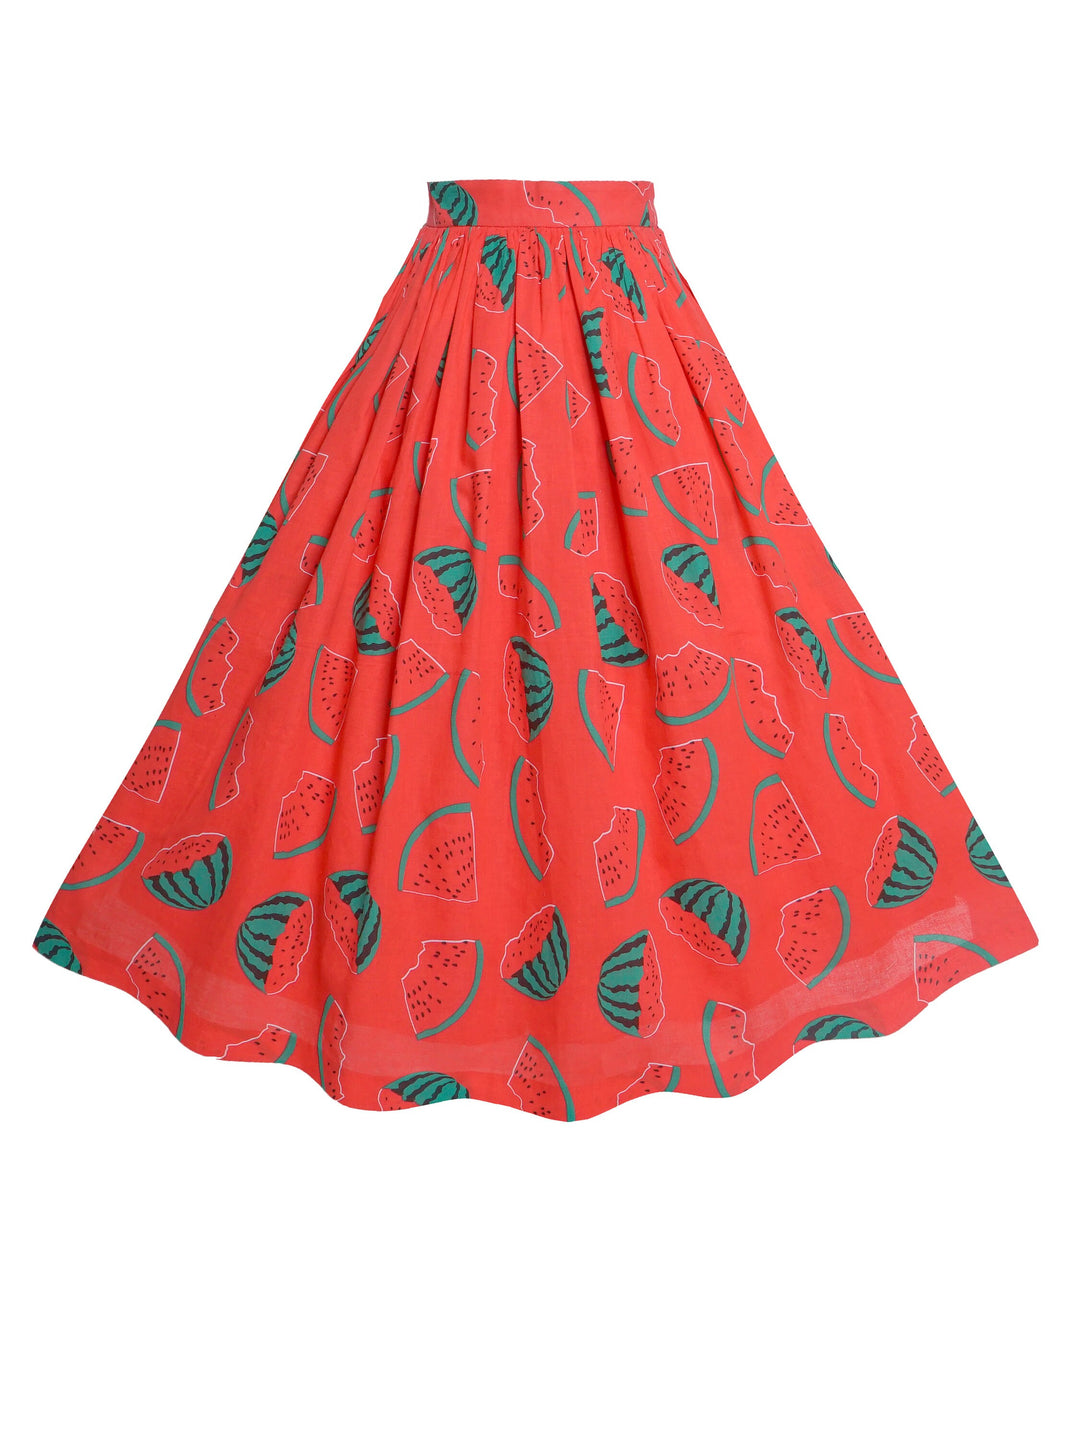 RTS - Size S - Lola Skirt Red "Feeling a Bit Meloncholy"